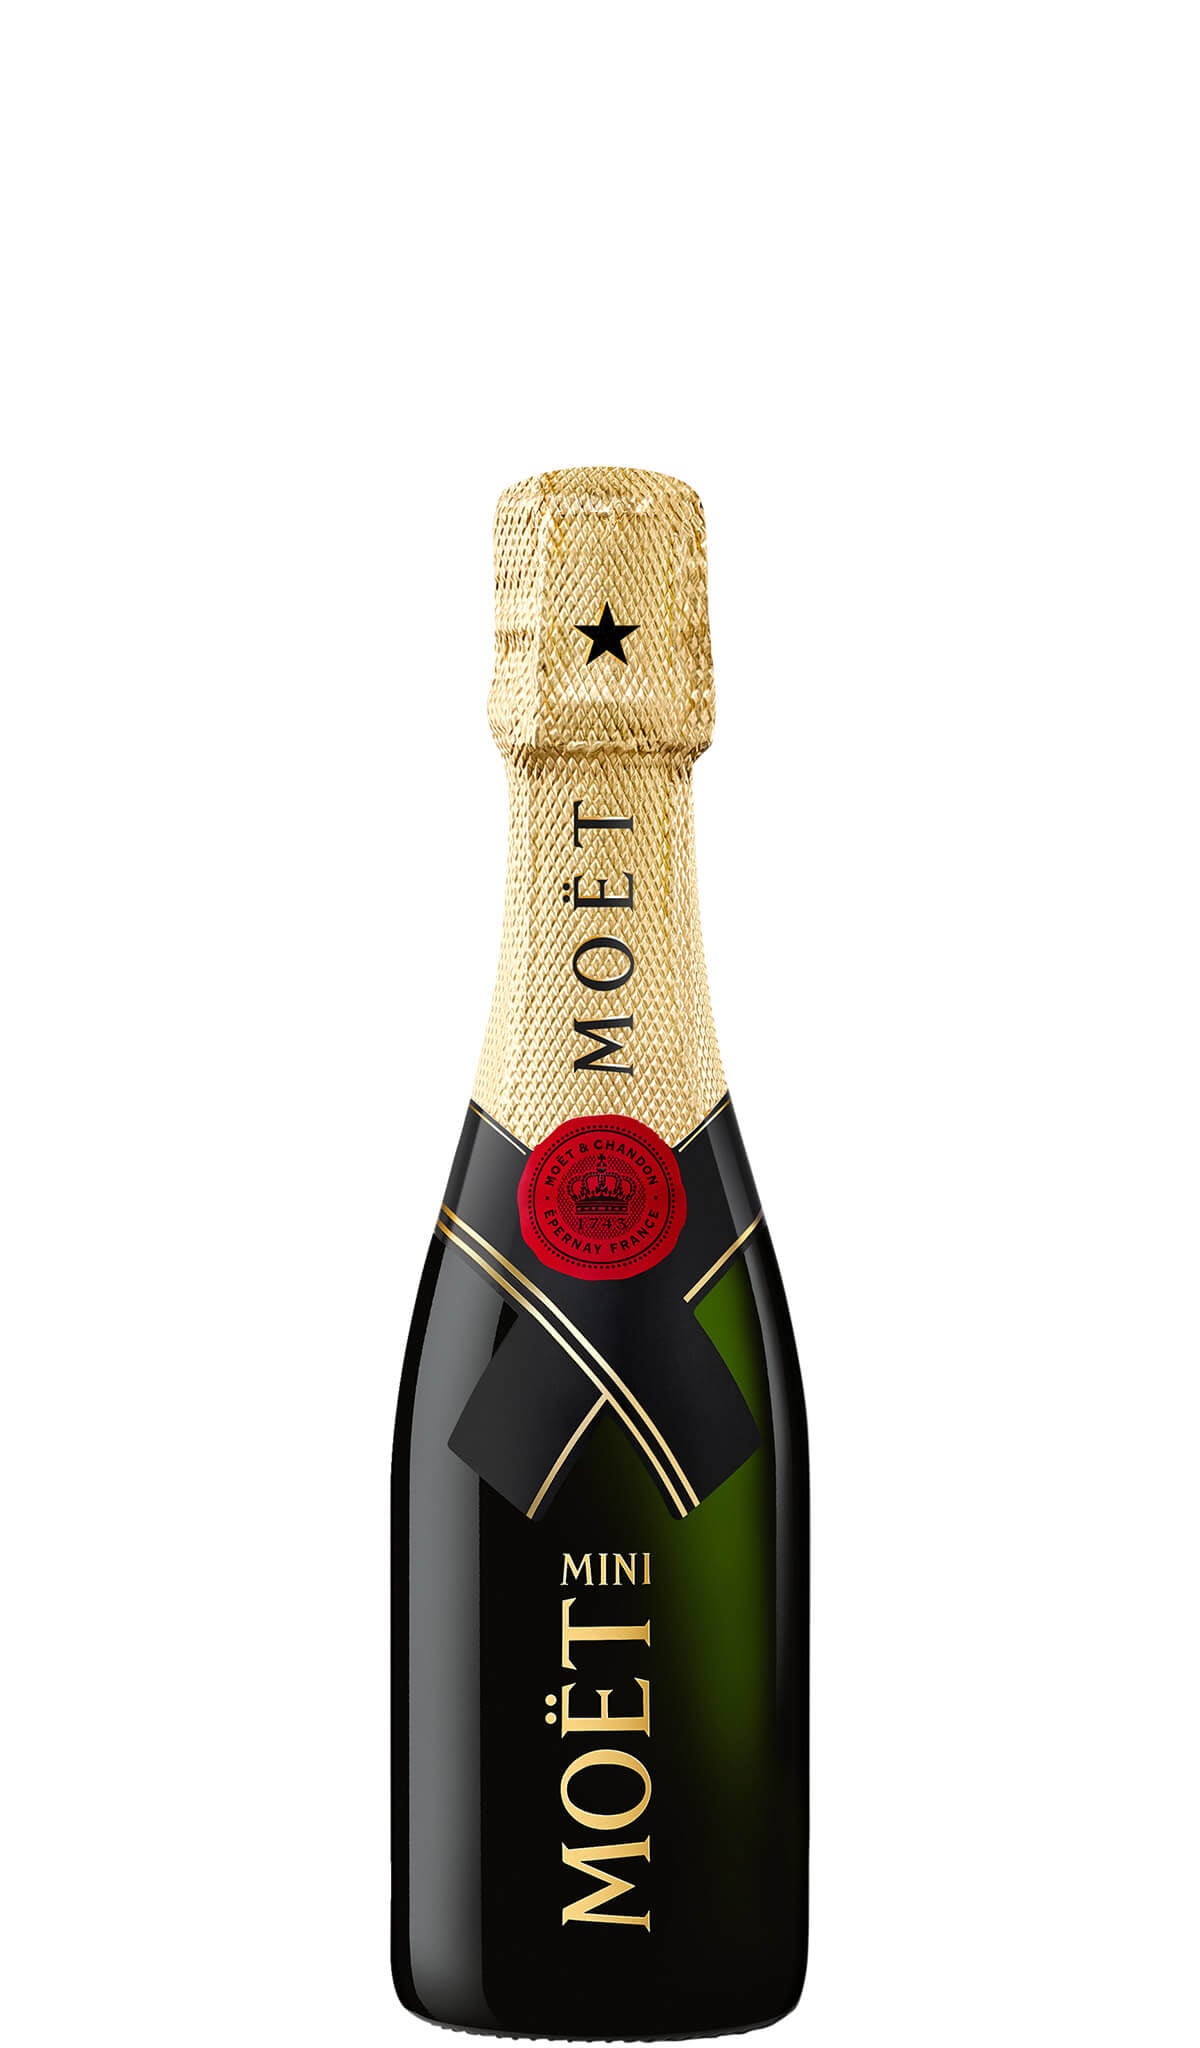 Find out more or buy Moët & Chandon Brut Impérial 200ml (Mini - Piccolo) online at Wine Sellers Direct - Australia’s independent liquor specialists.